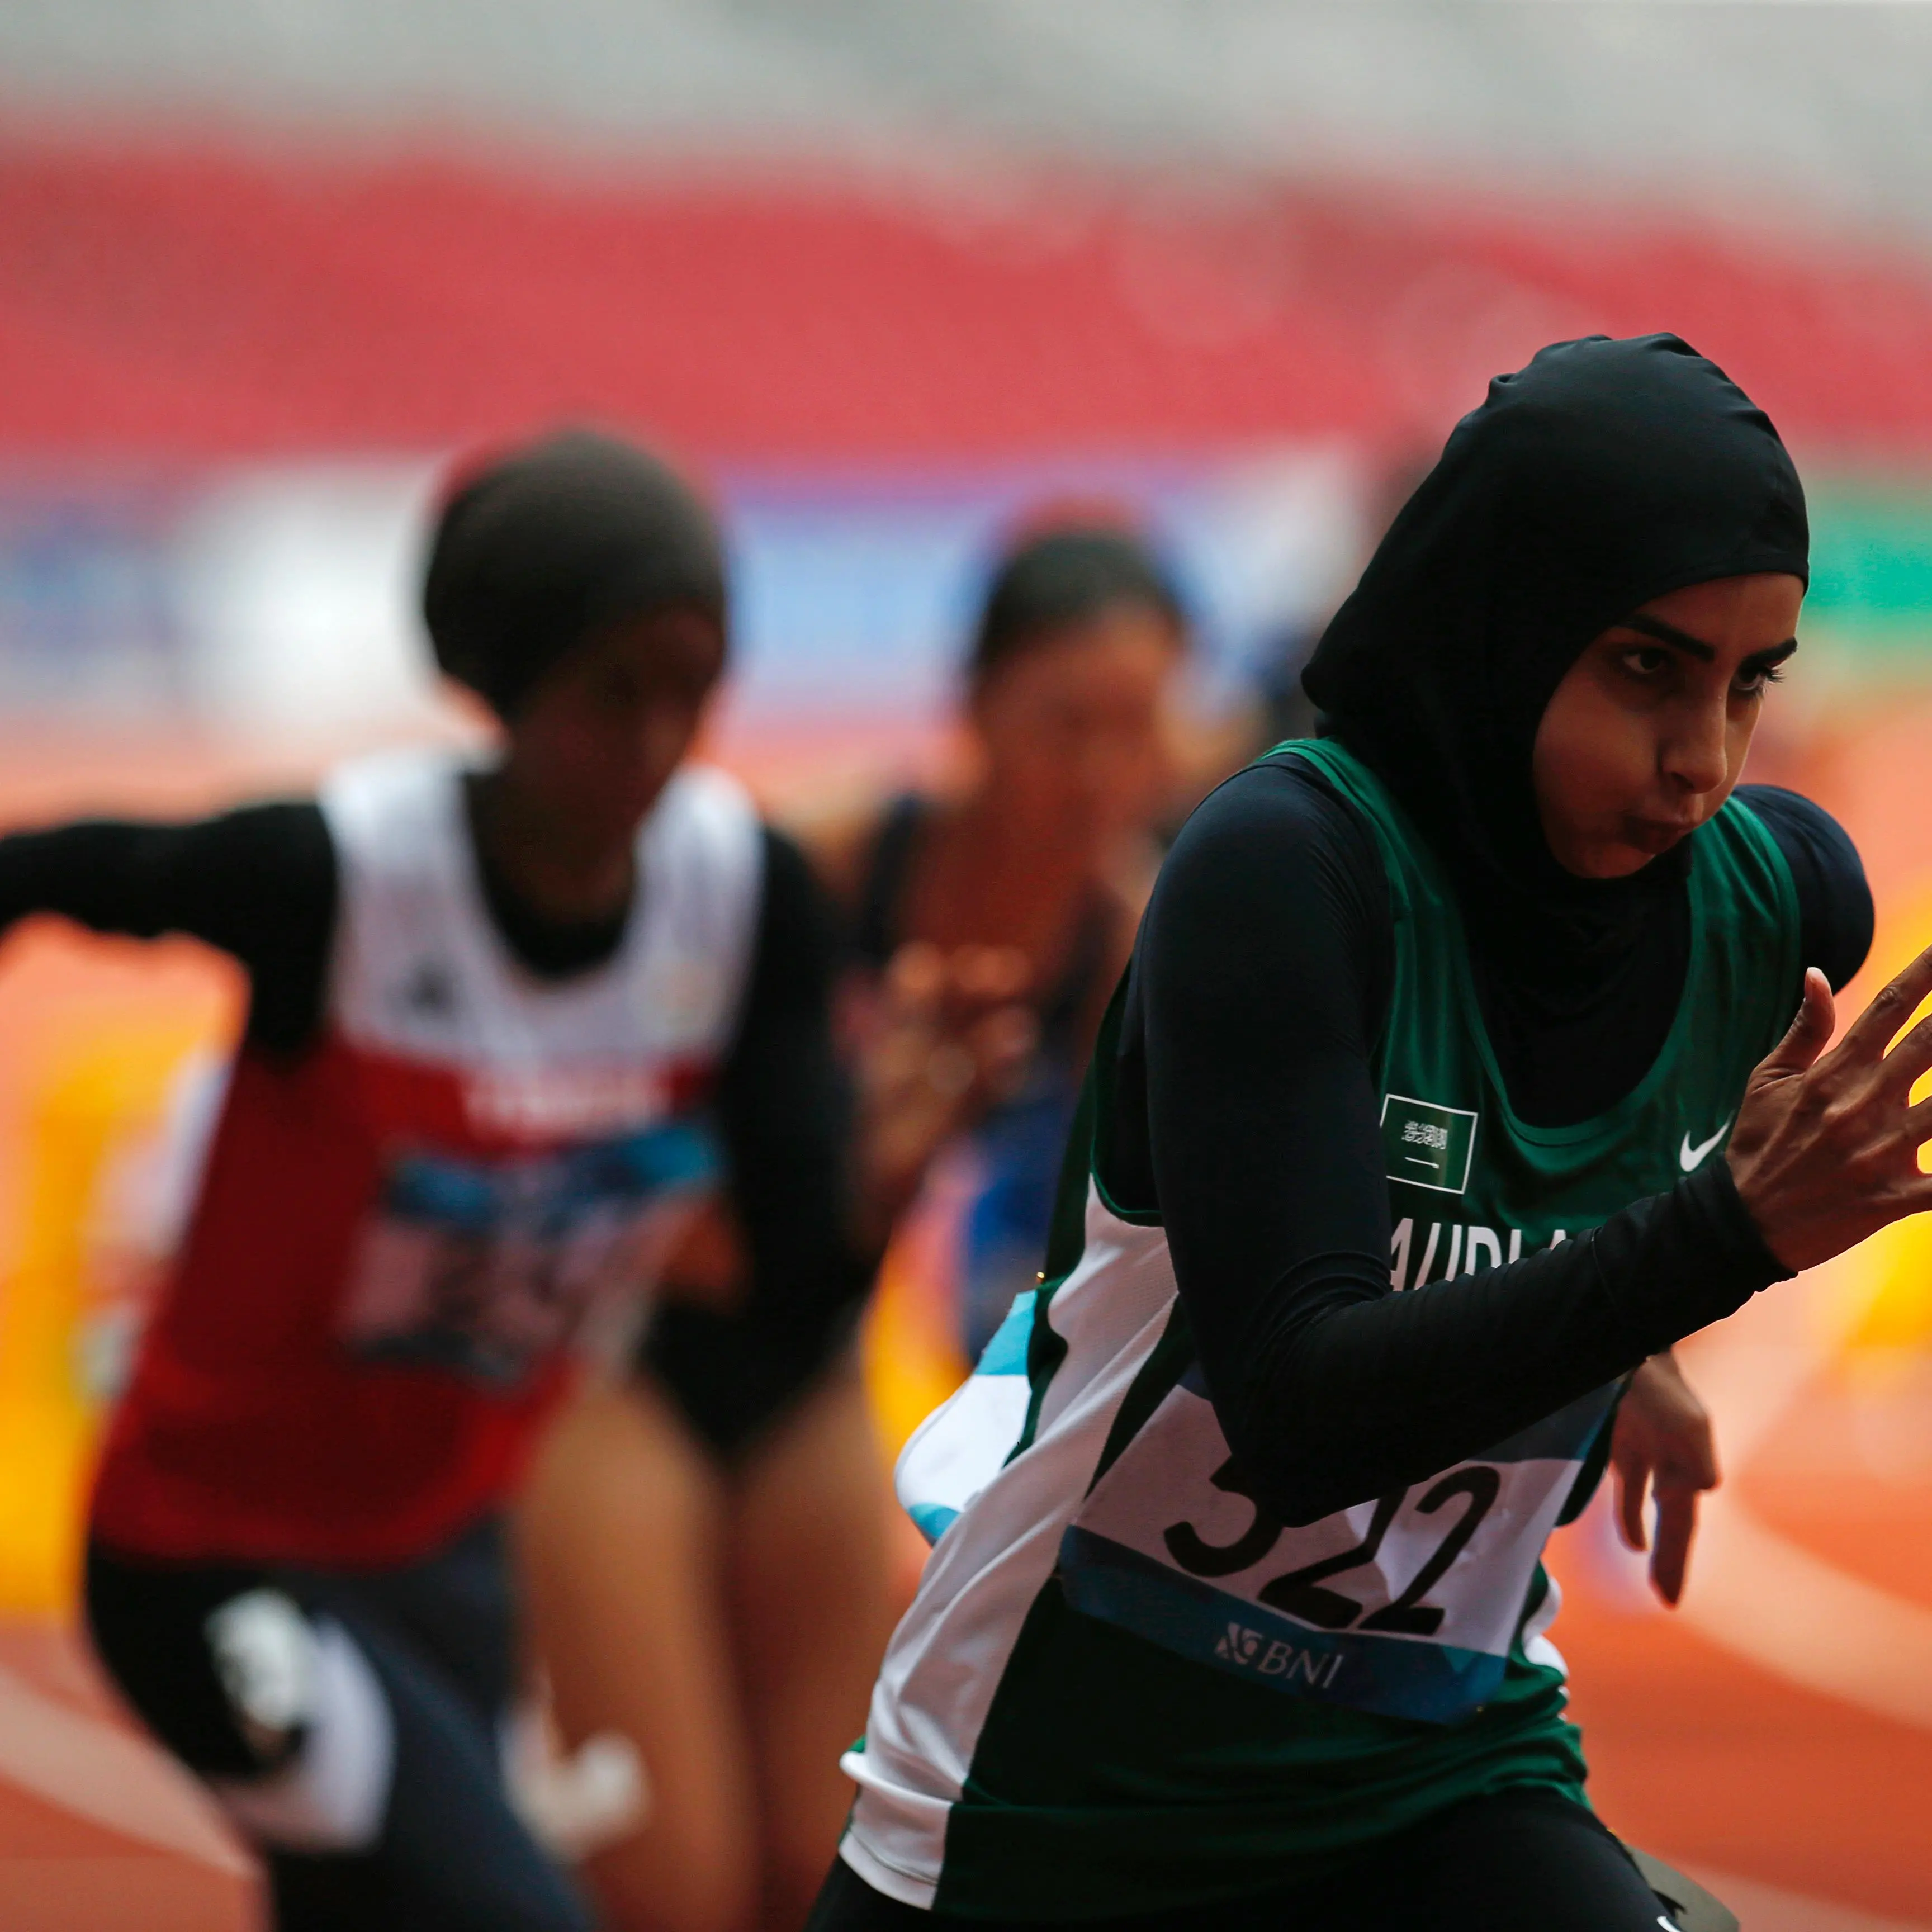 Time ripe for Saudi athletes to chase sponsorship opportunities